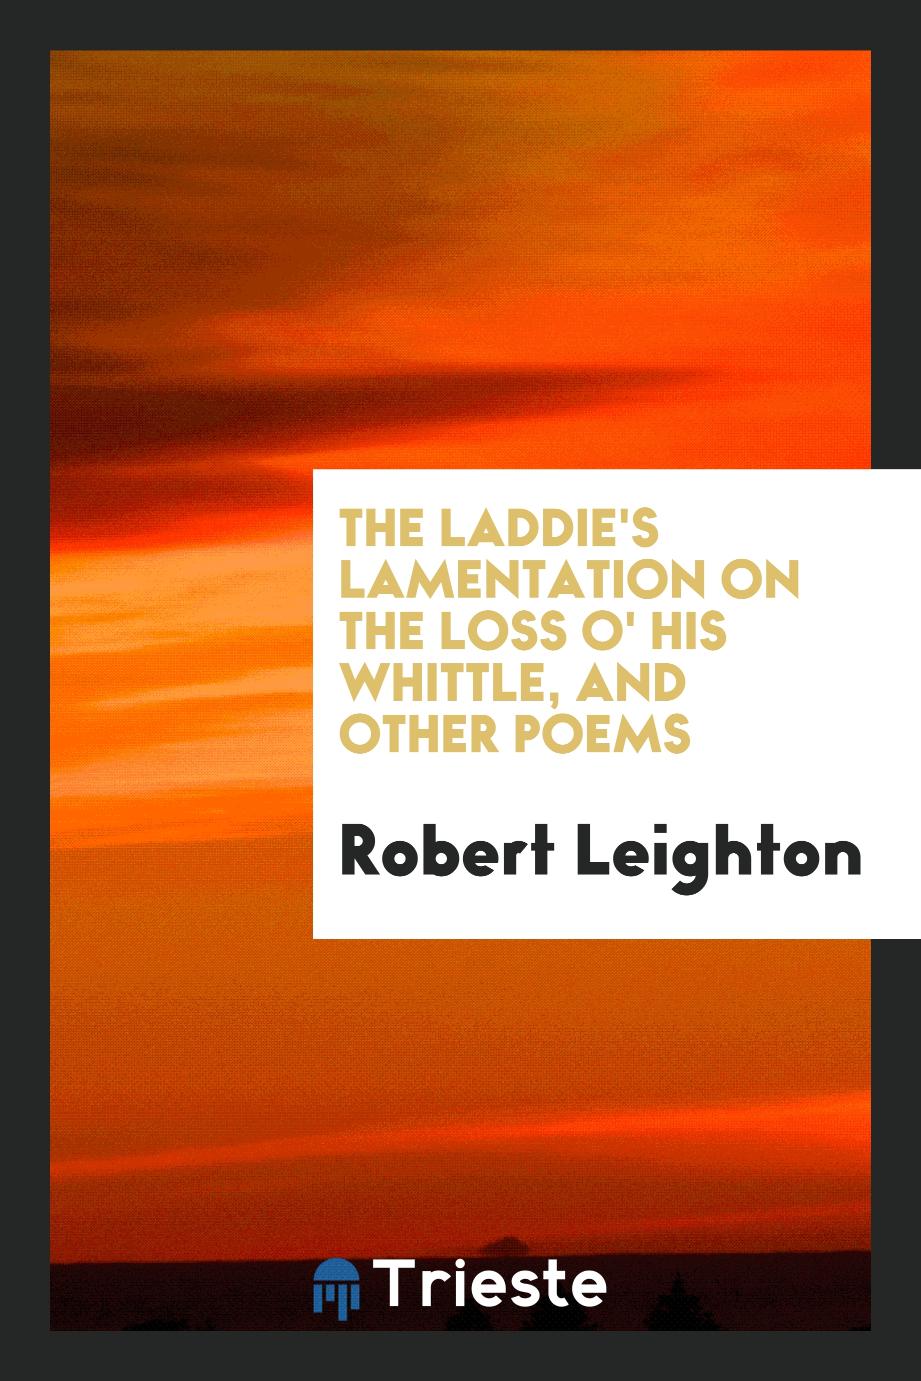 The laddie's lamentation on the loss o' his whittle, and other poems